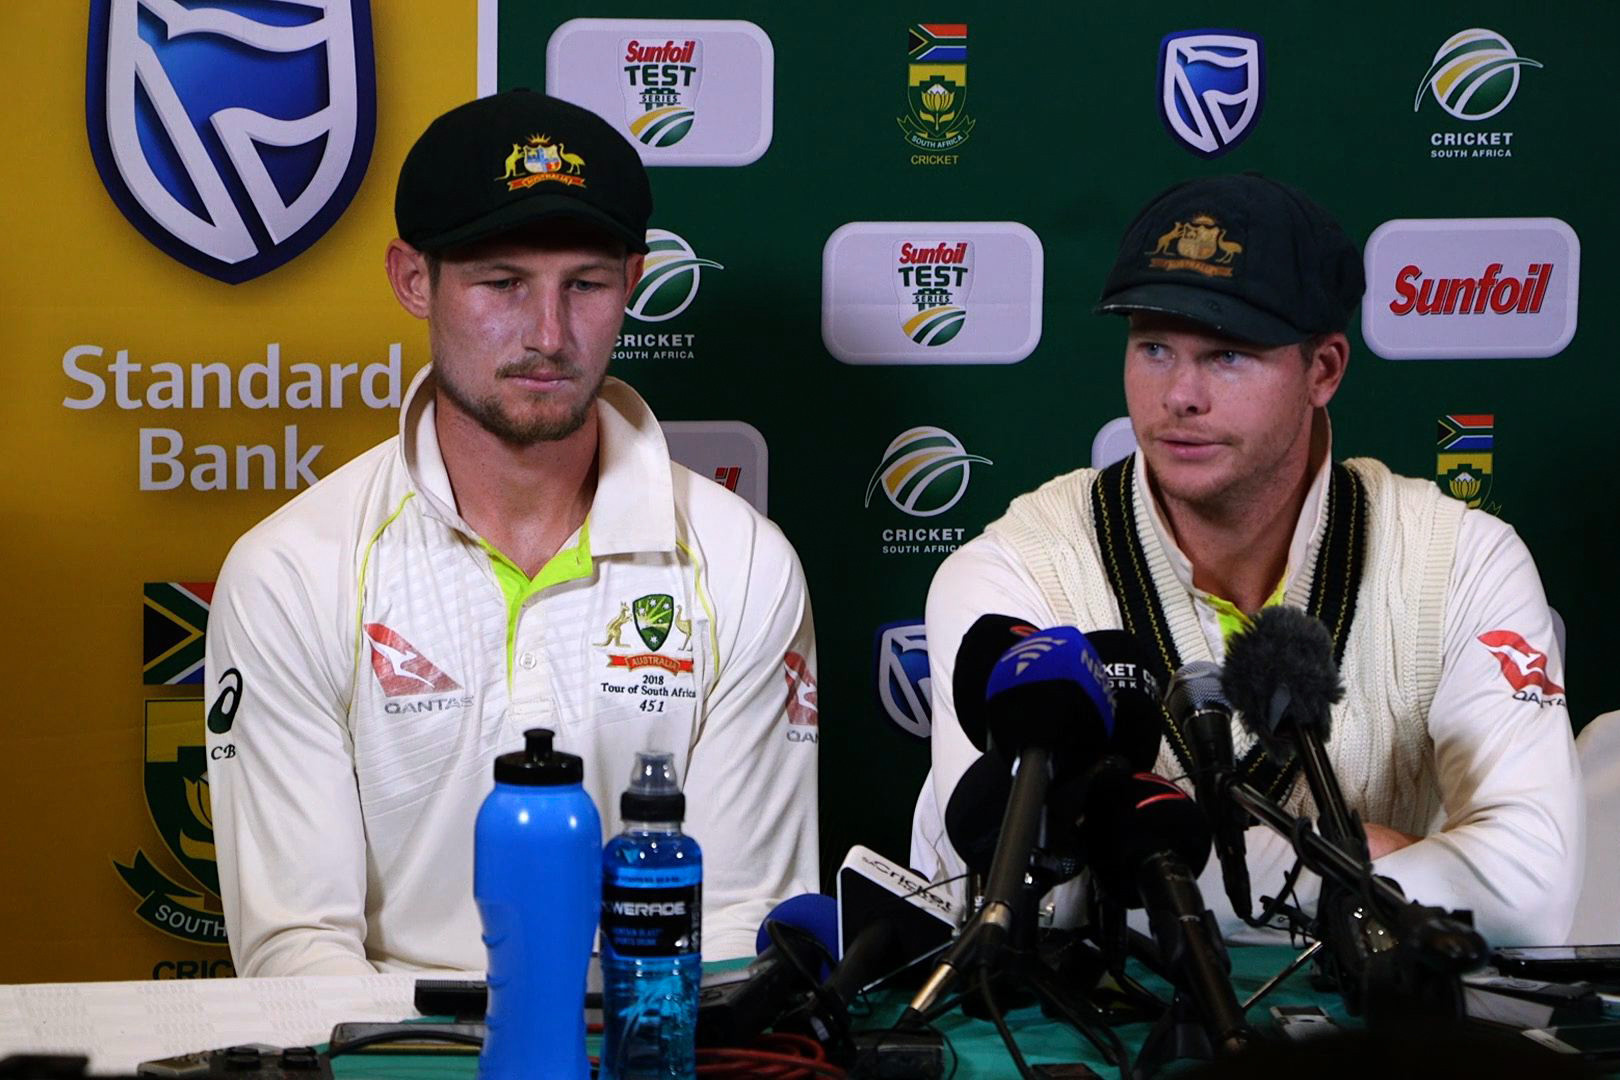 Steve Smith, left, and Cameron Bancroft admitted to ball-tampering after the match ©Getty Images